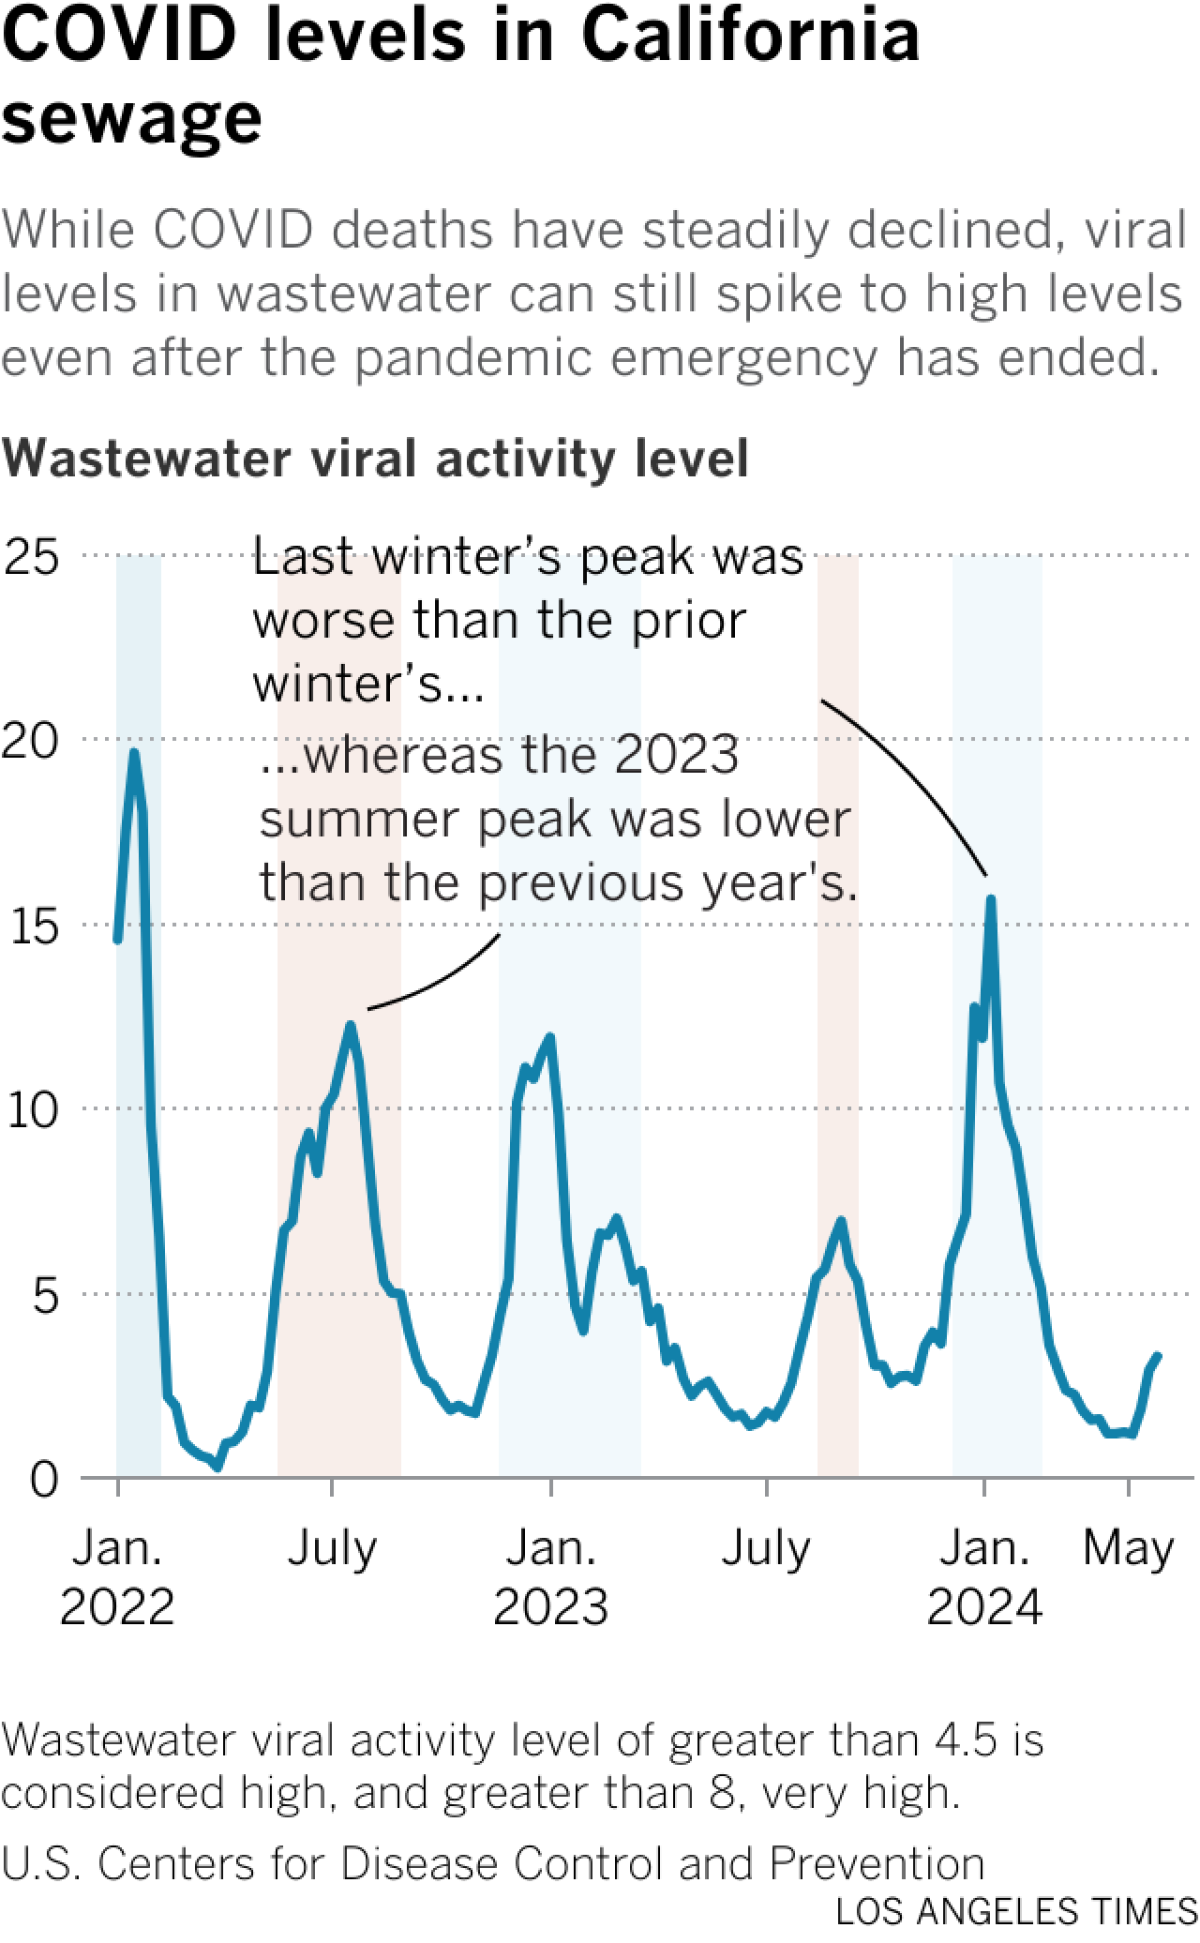 While COVID deaths have steadily declined, viral levels in wastewater can still spike to high levels even after the pandemic emergency has ended.